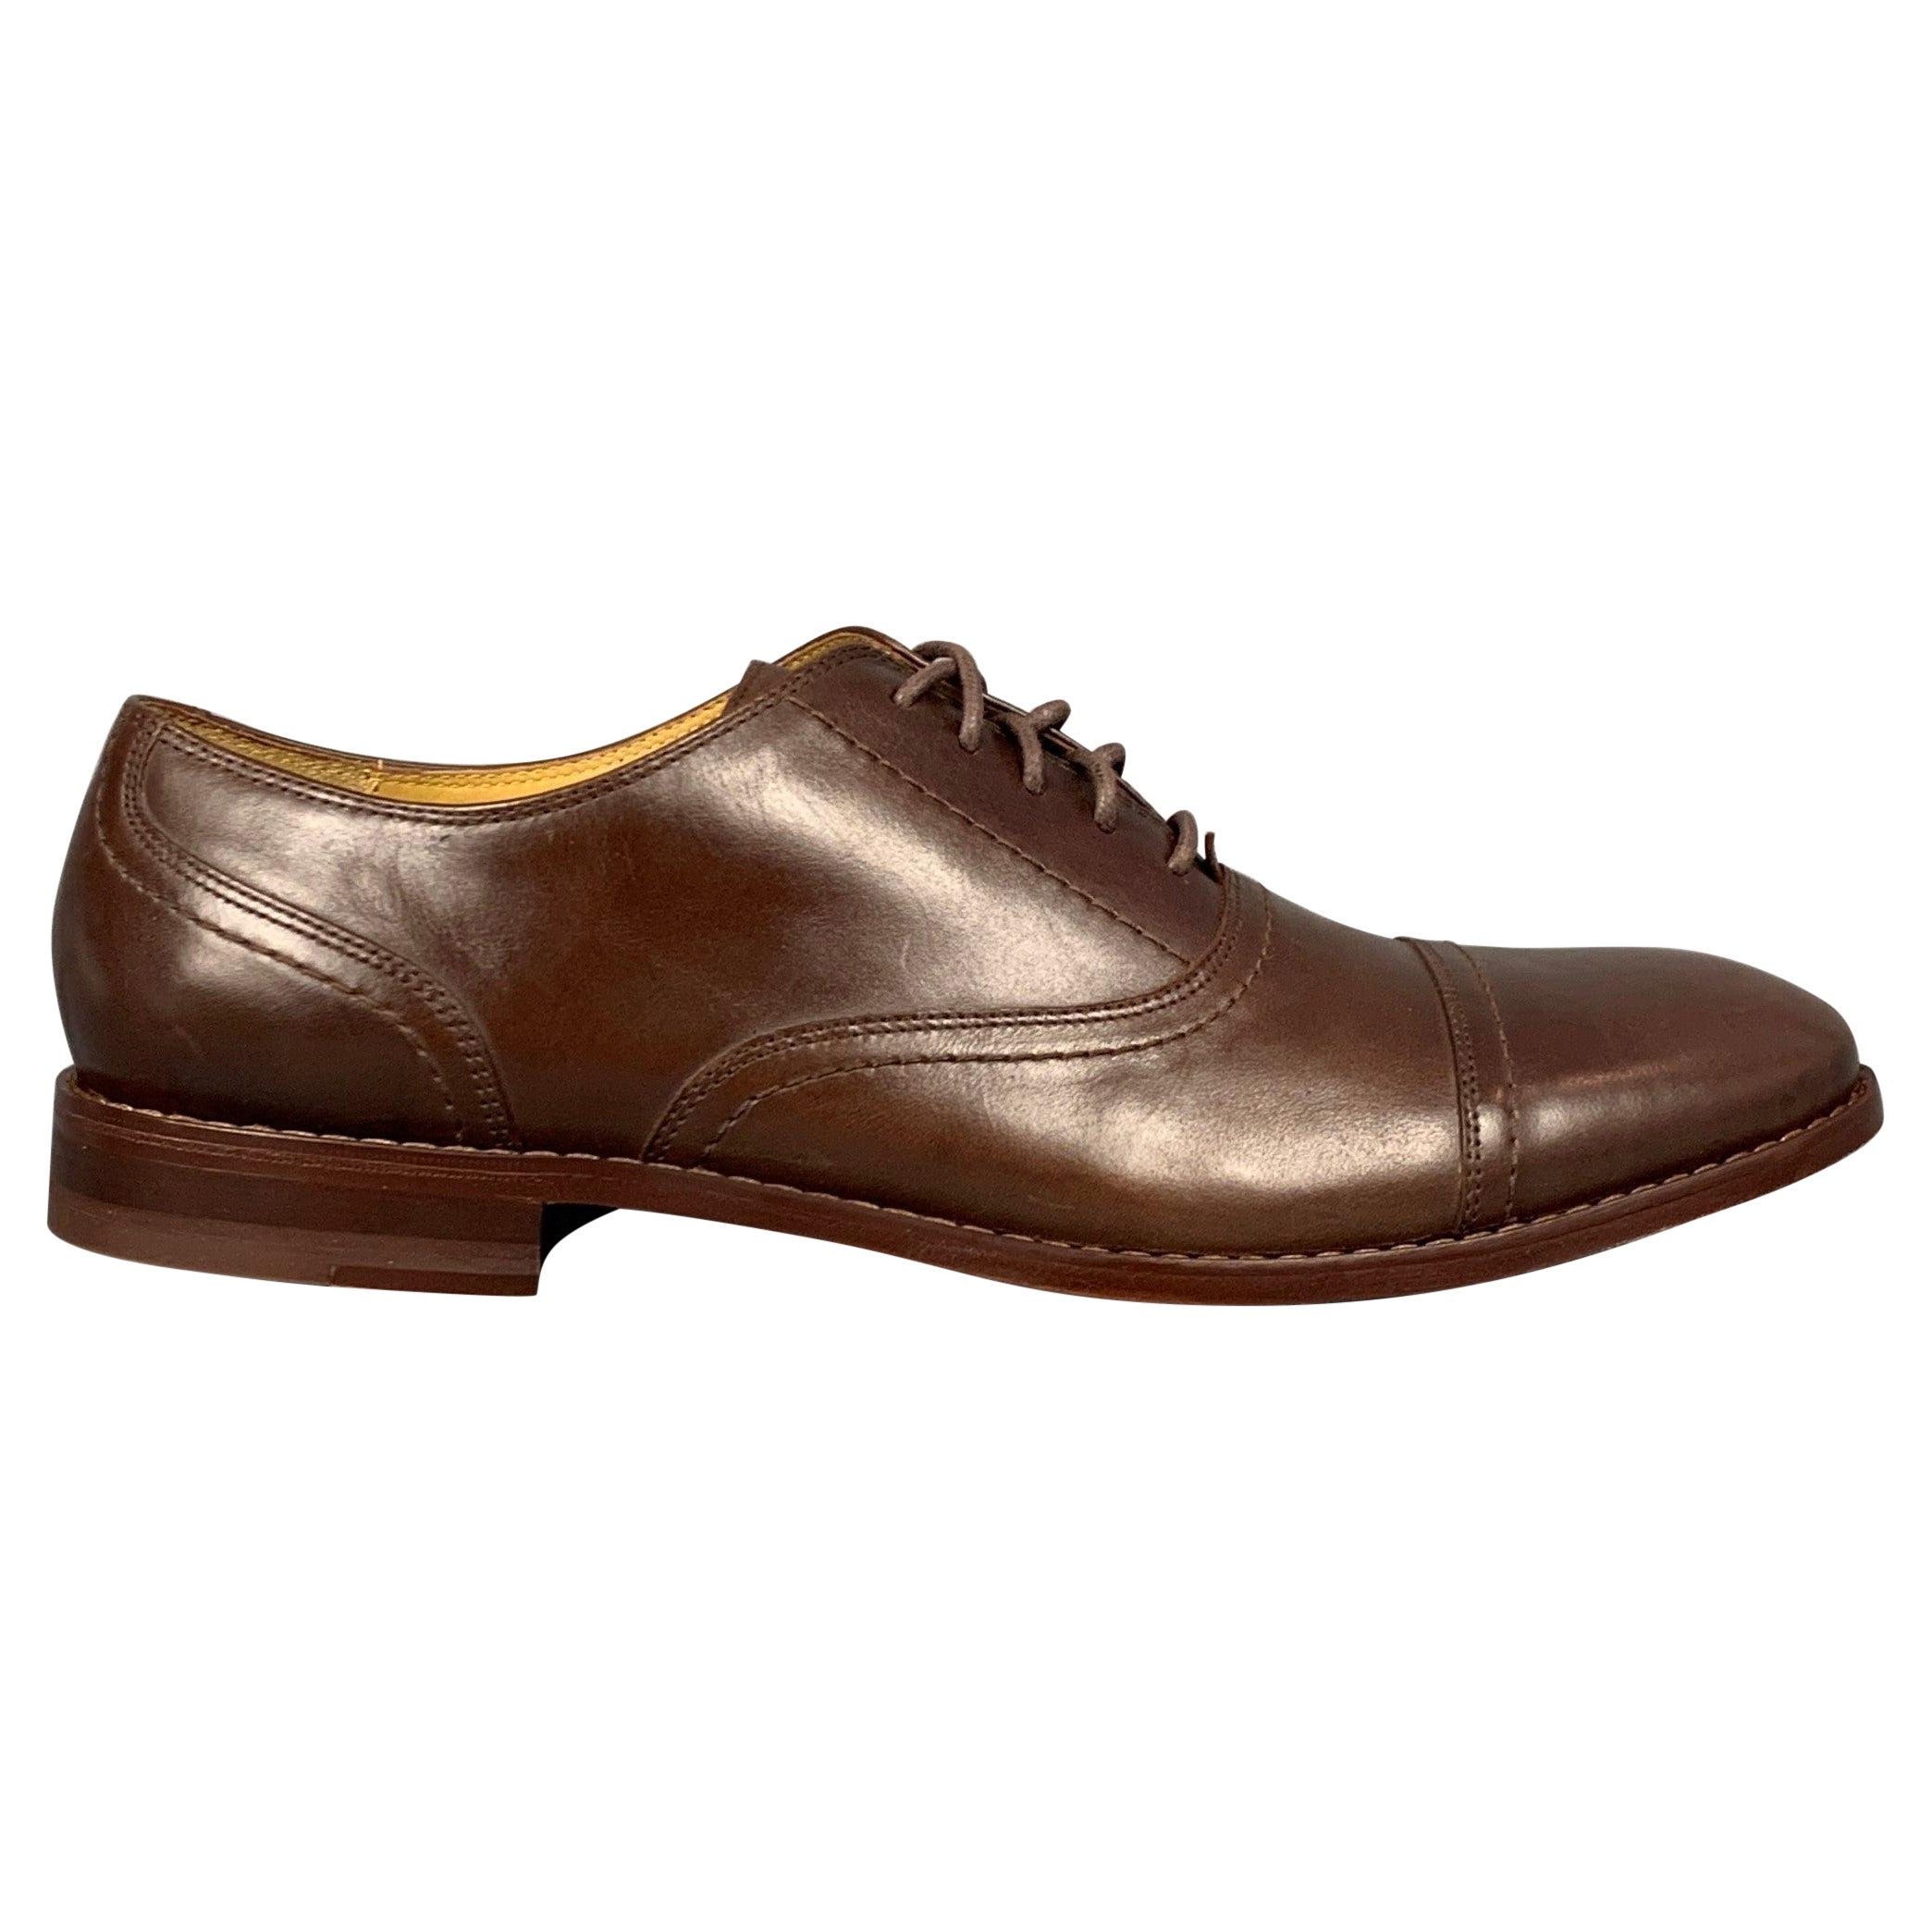 MICHAEL BASTIAN Size 10 Brown Leather Cap Toe Lace Up Shoes For Sale